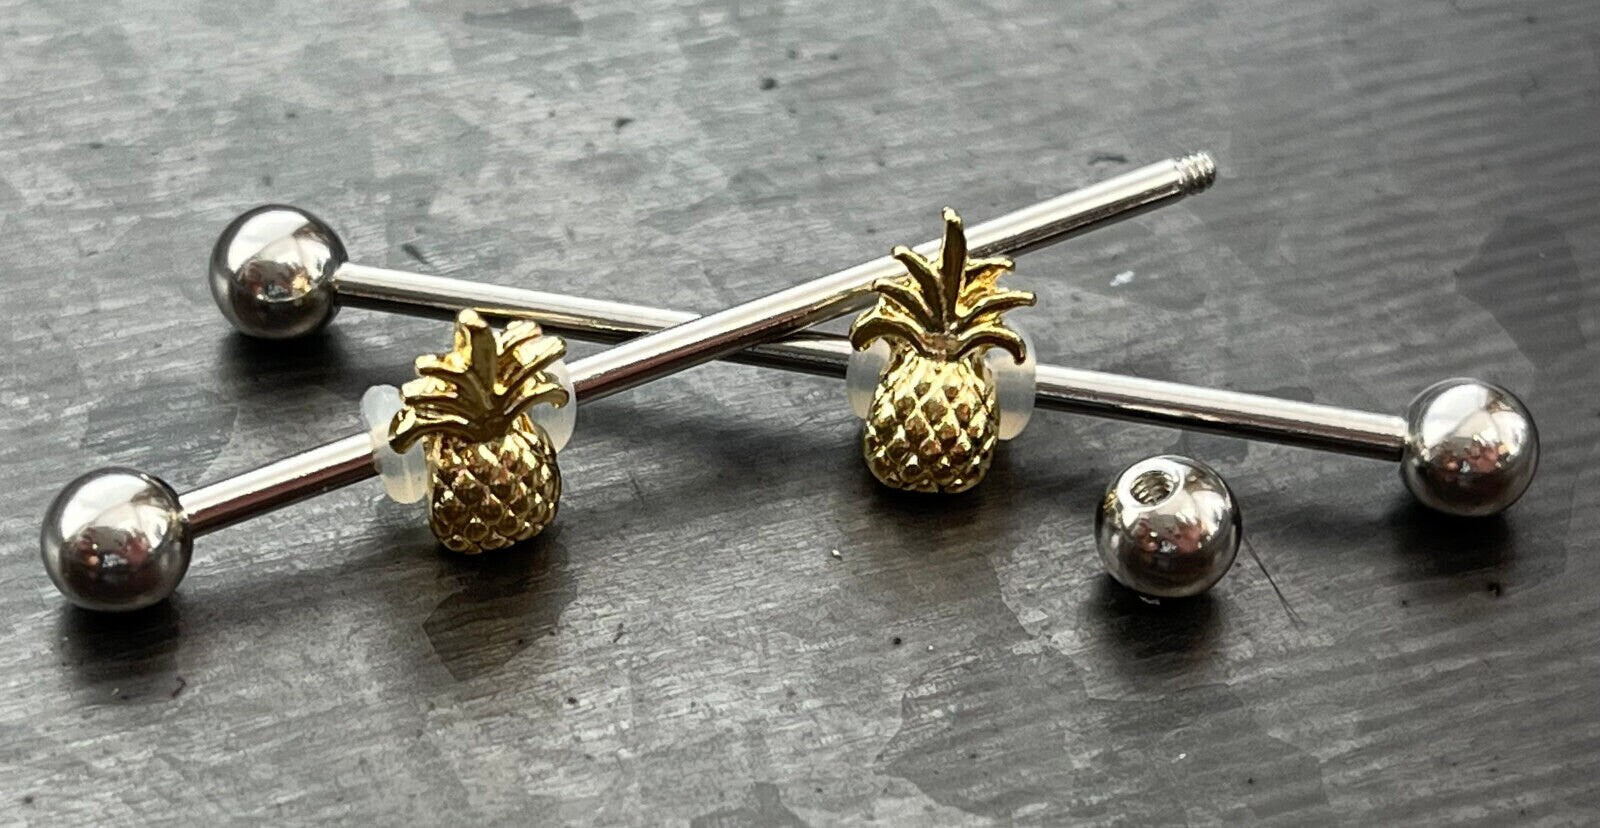 1 Piece Unique Movable Pineapple Industrial Barbell - 14g - (38mm) 1&1/2" Wearable Length Available!